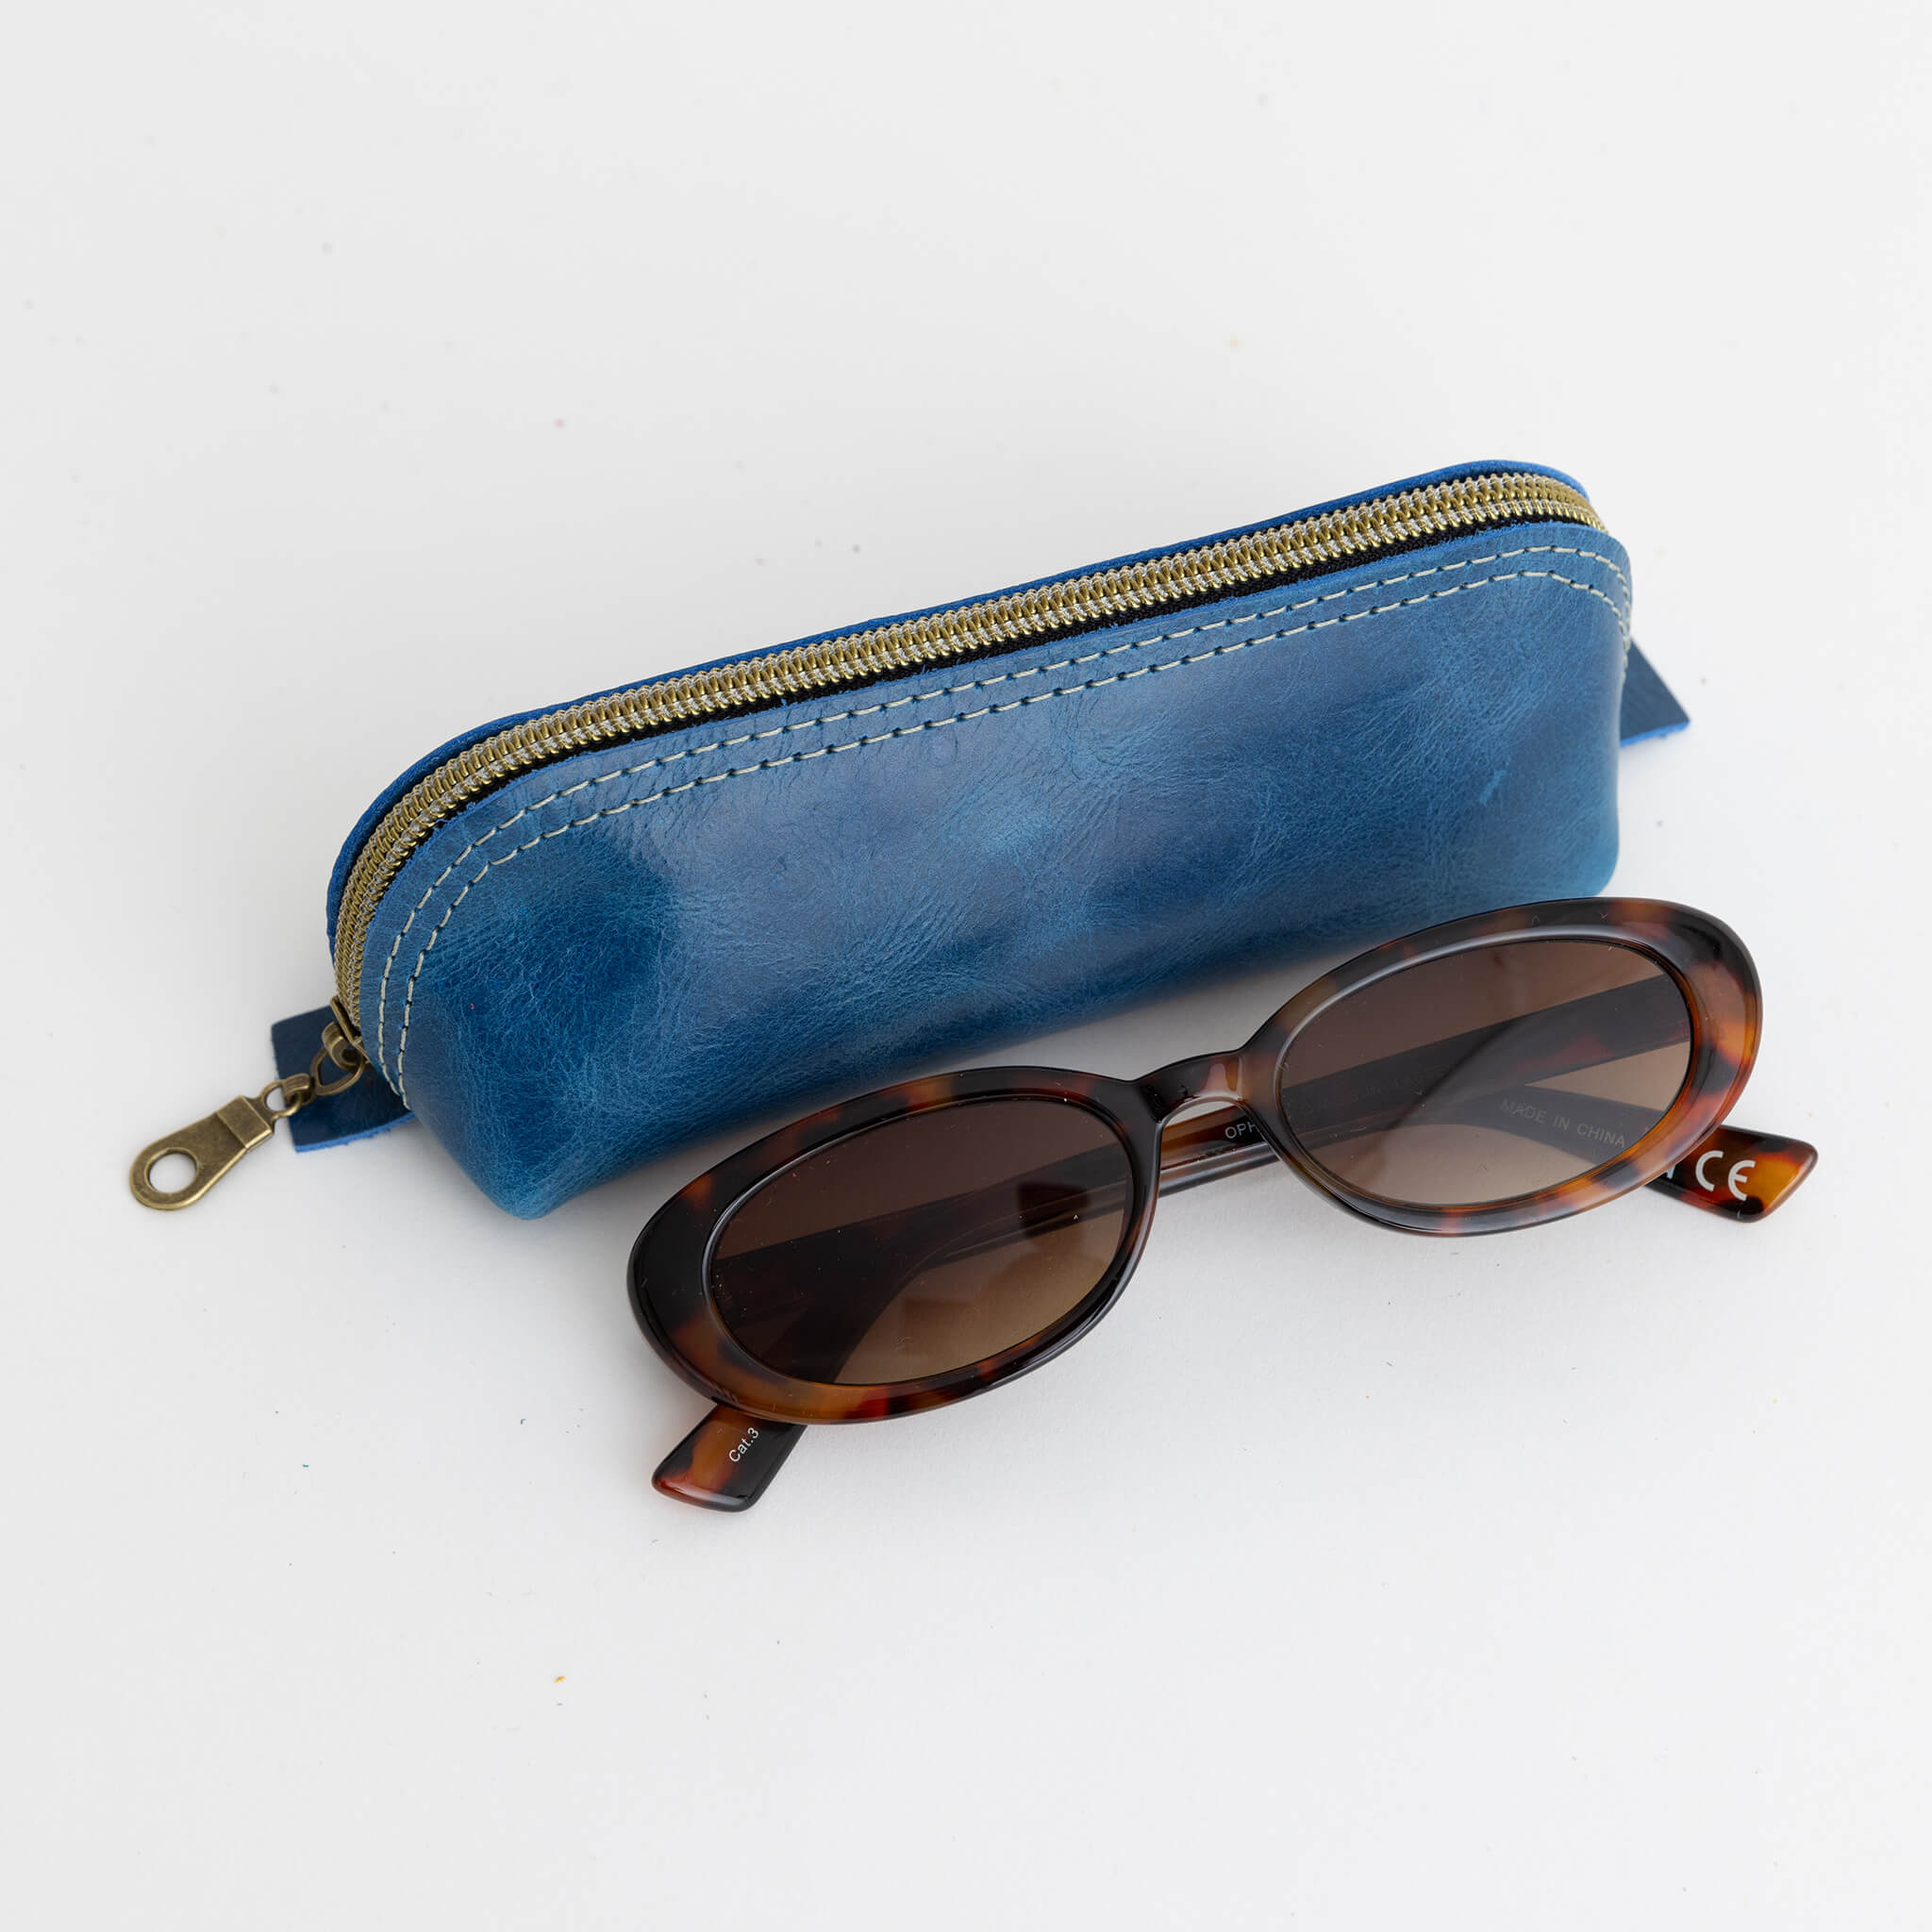 shelby pouch - zipper case - handmade leather - royal front view